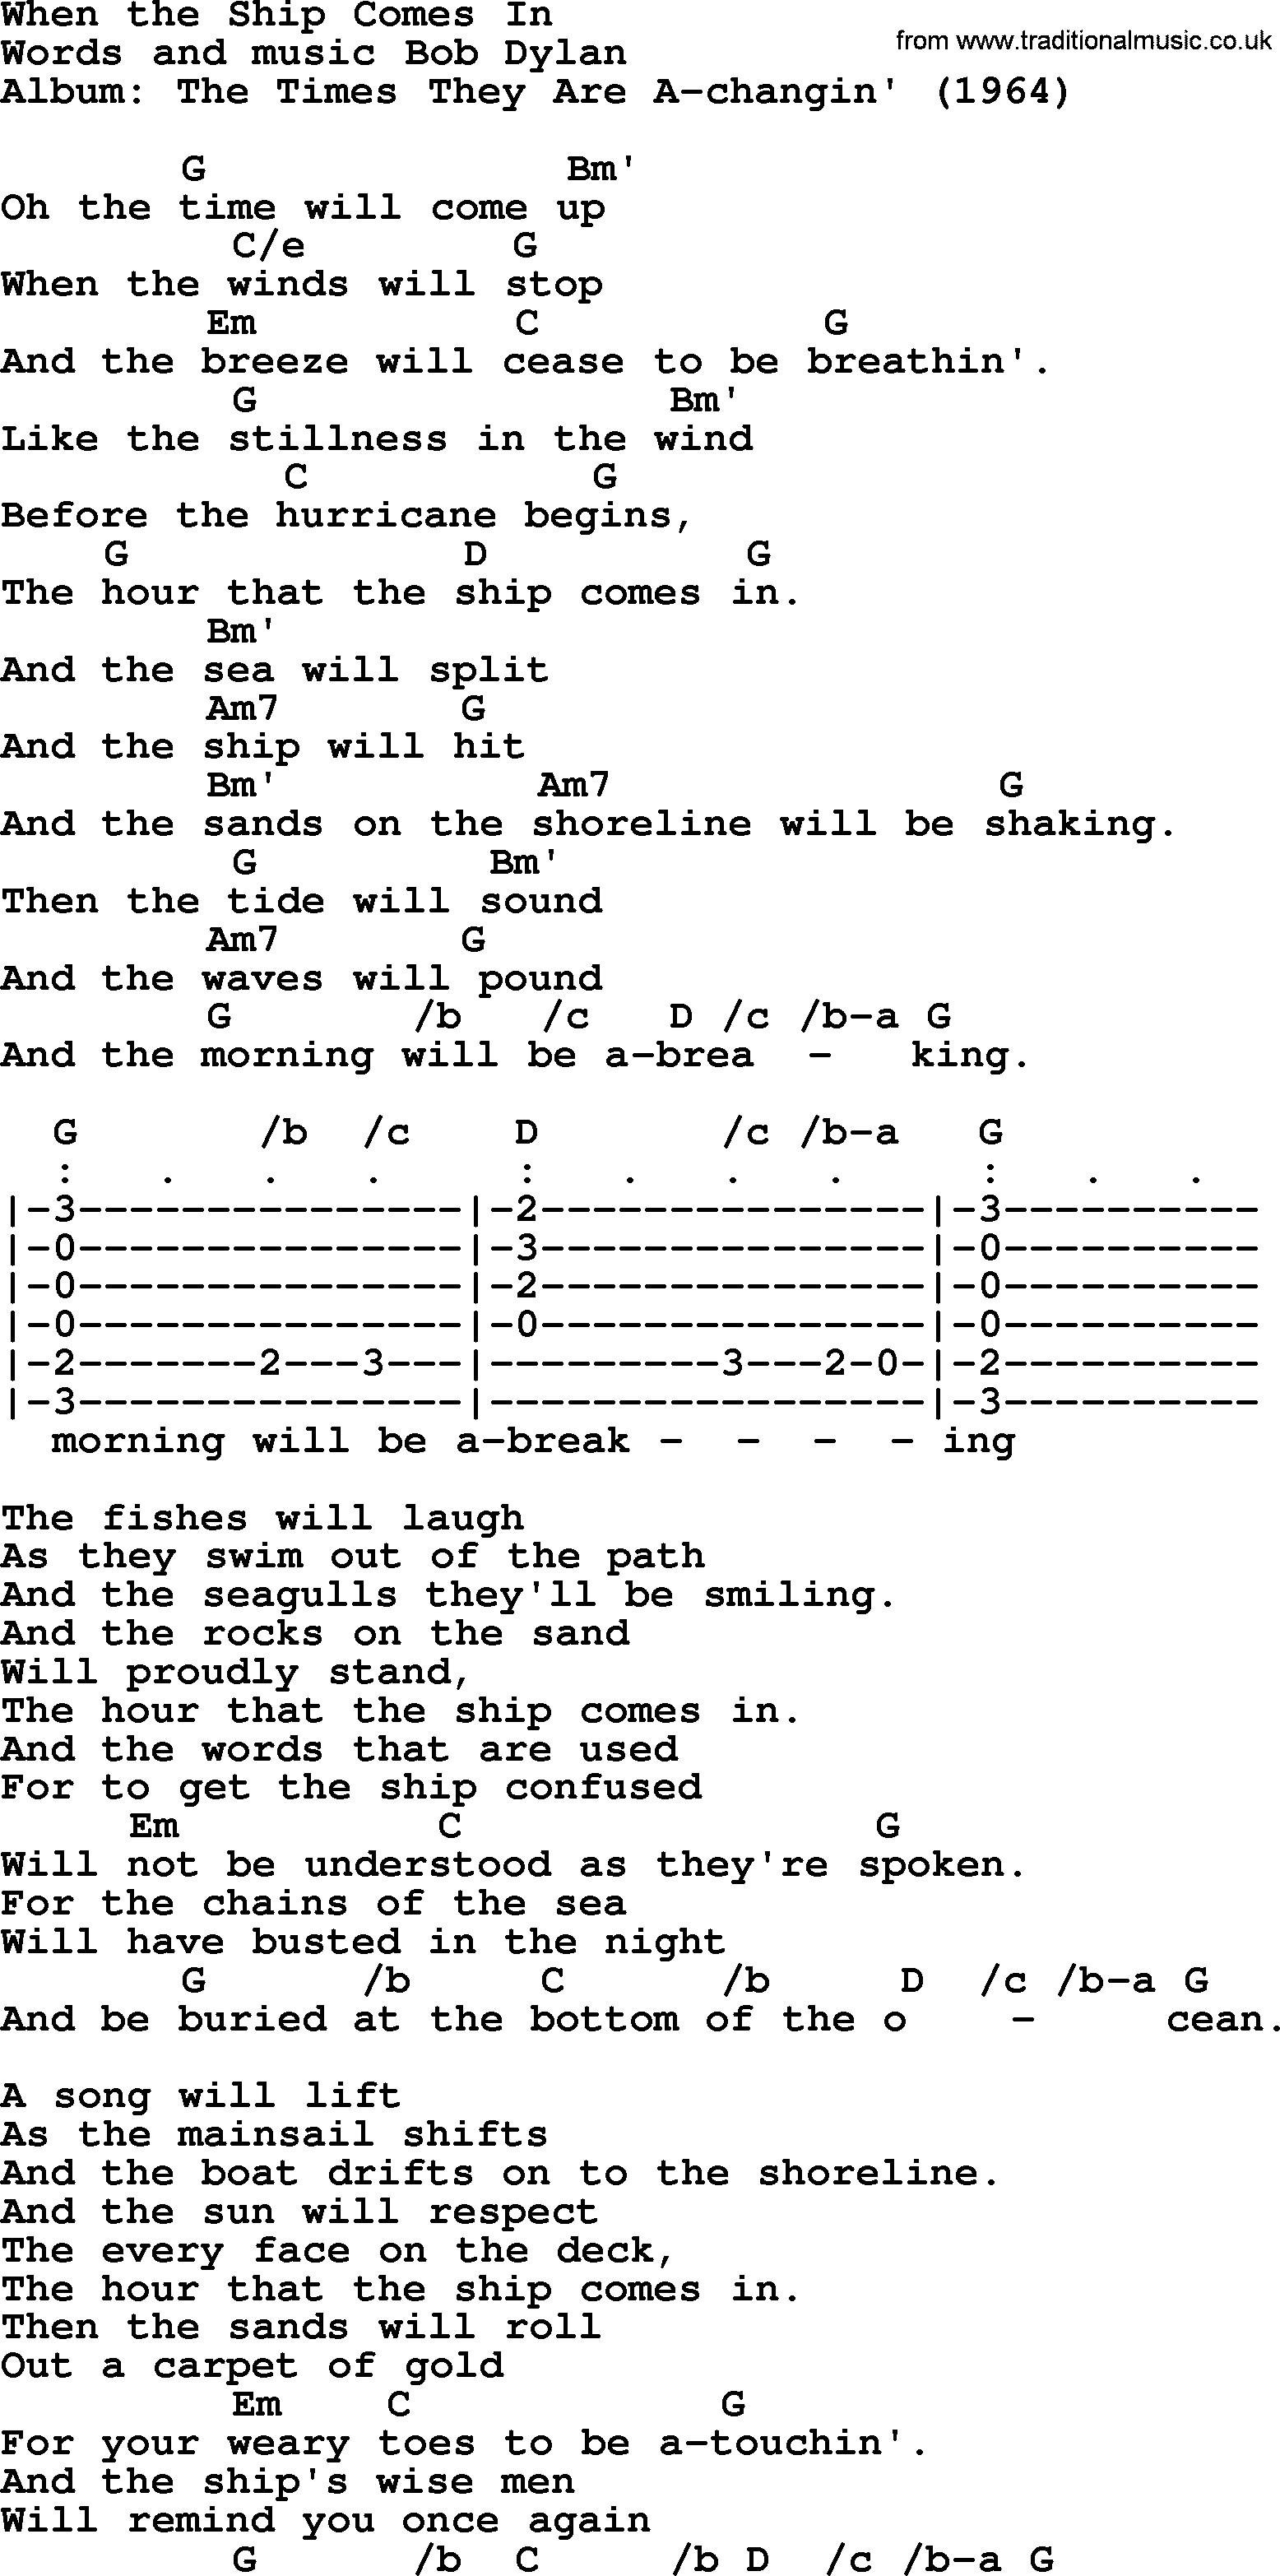 Bob Dylan song, lyrics with chords - When the Ship Comes In